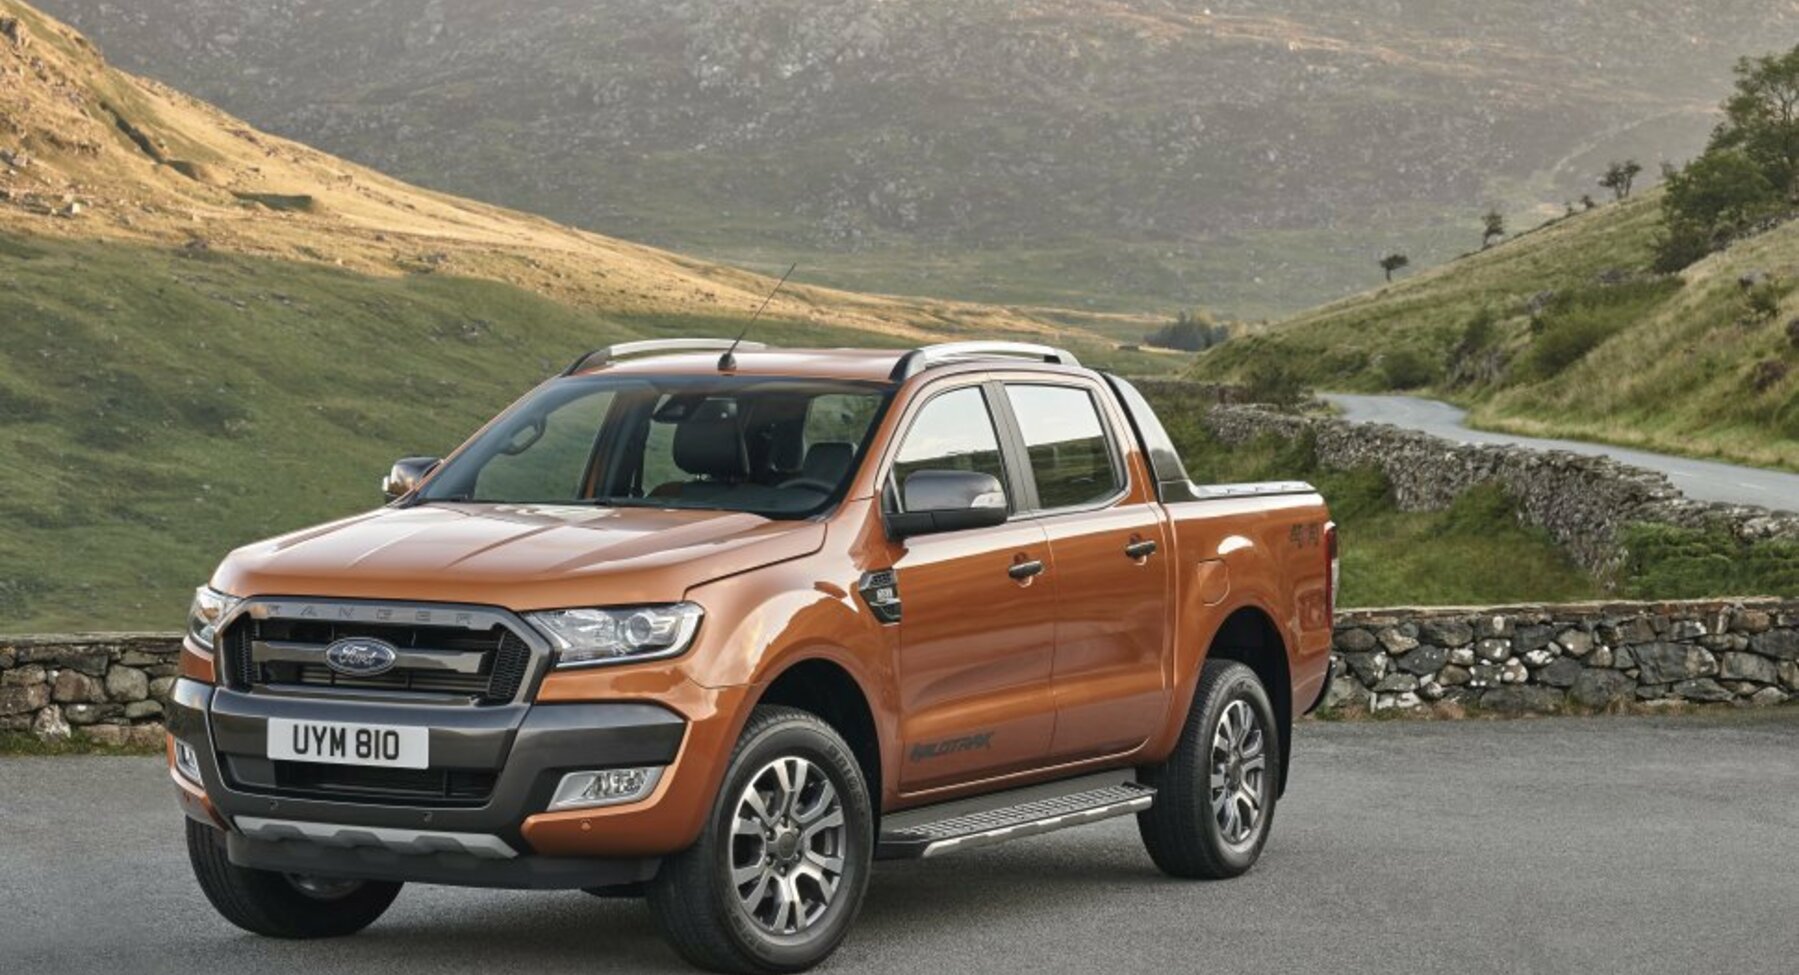 Ford Ranger III Double Cab (facelift 2015) 2.2 TDCi (130 Hp) 2015, 2016, 2017, 2018 